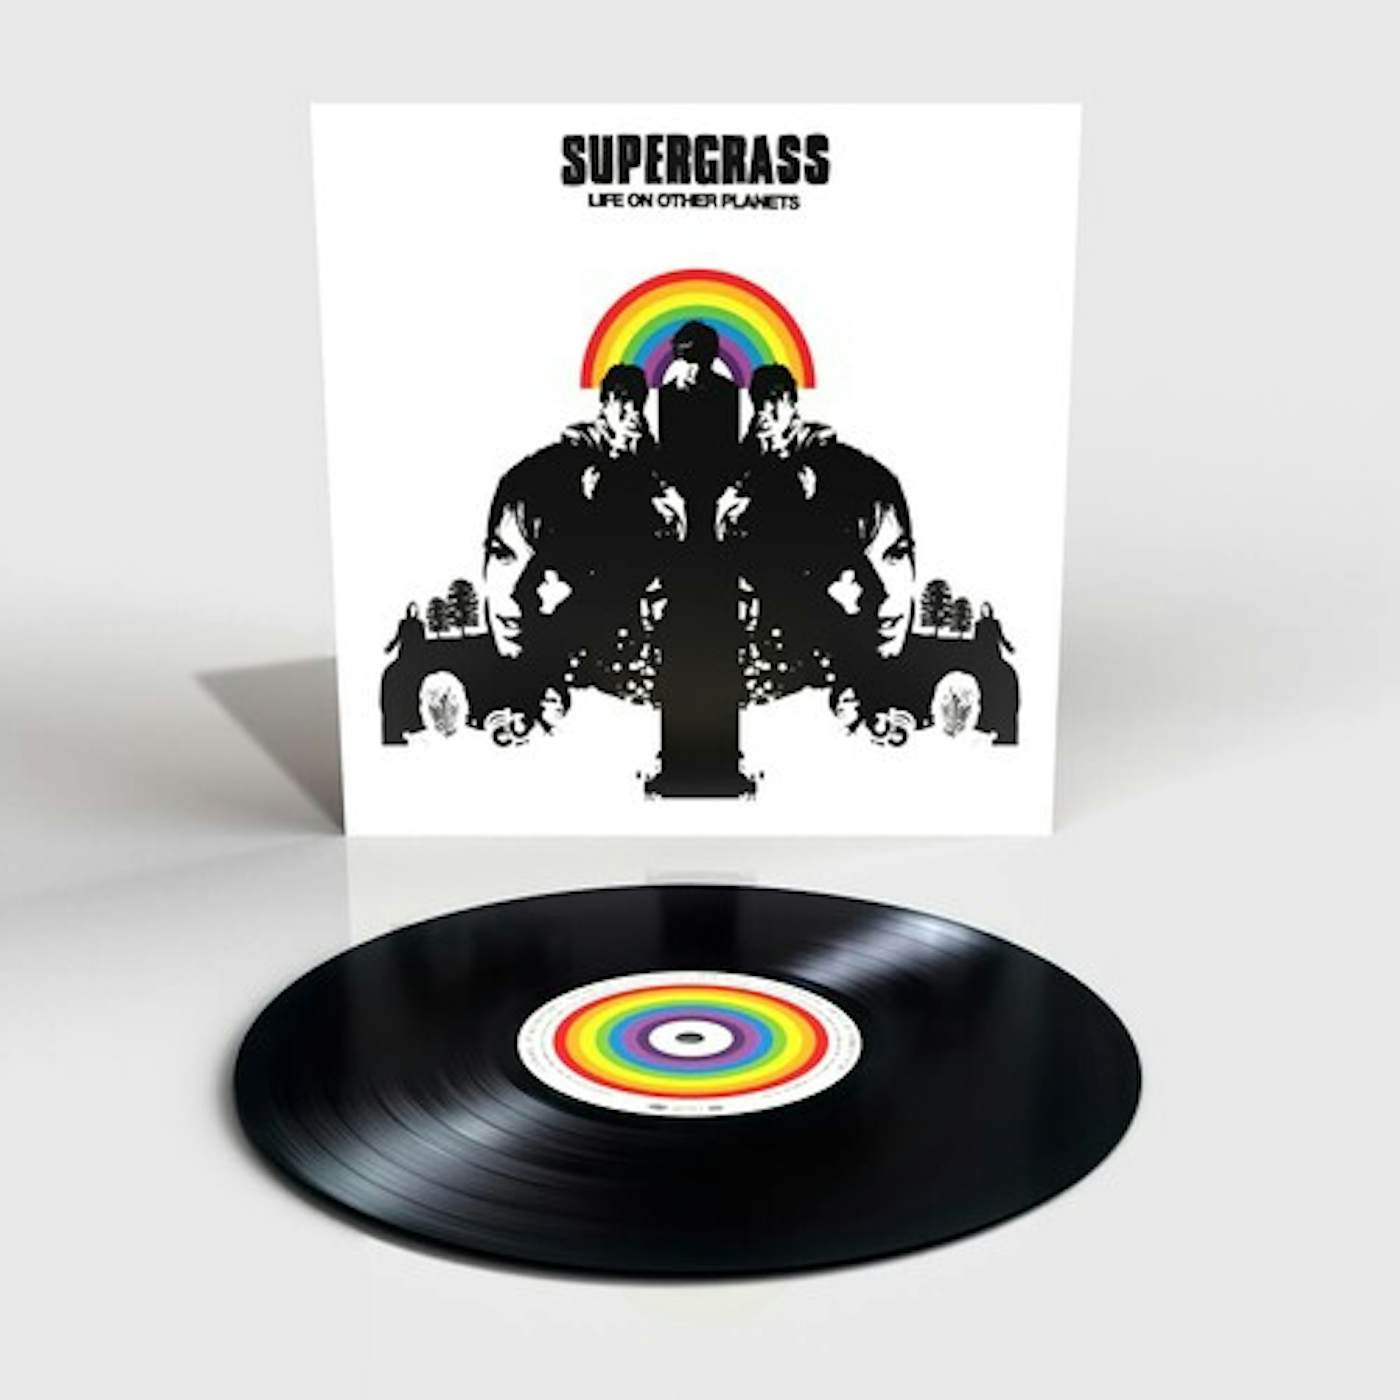 Supergrass LIFE ON OTHER PLANETS Vinyl Record